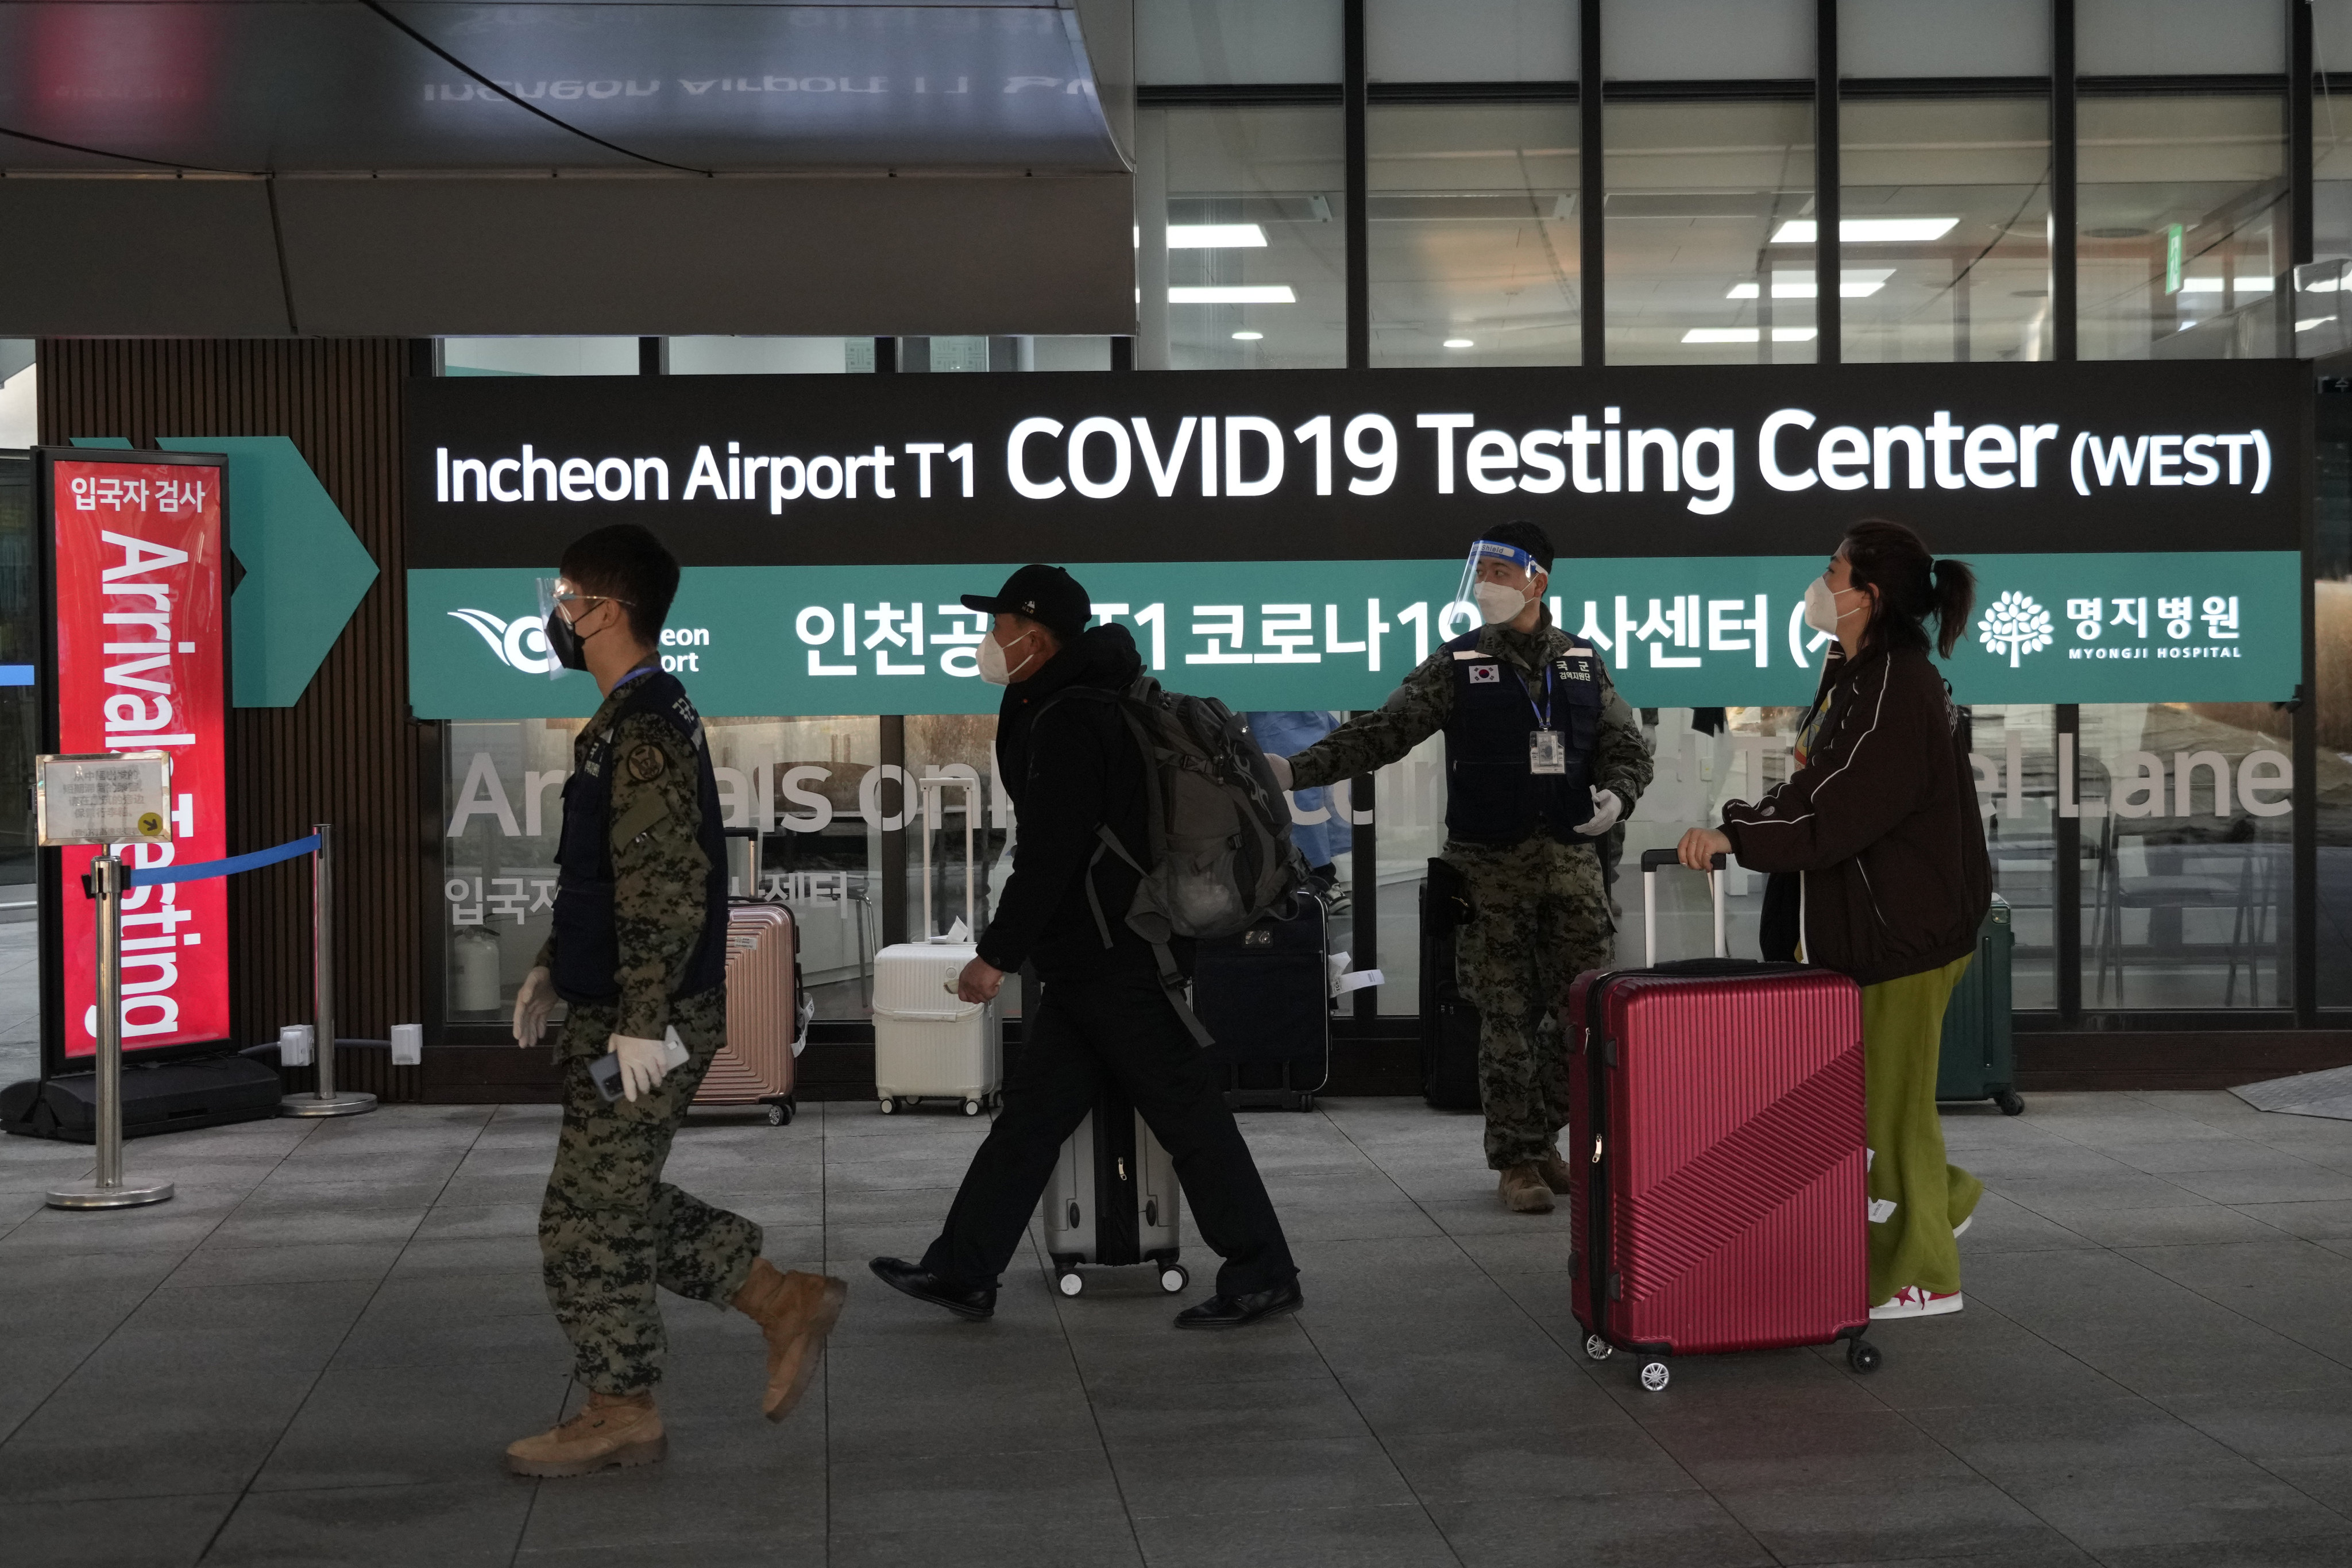 A social media account run by a nationalistic Chinese tabloid says Seoul’s visa entry restrictions and PCR tests unfairly target Chinese travellers. Photo: AP